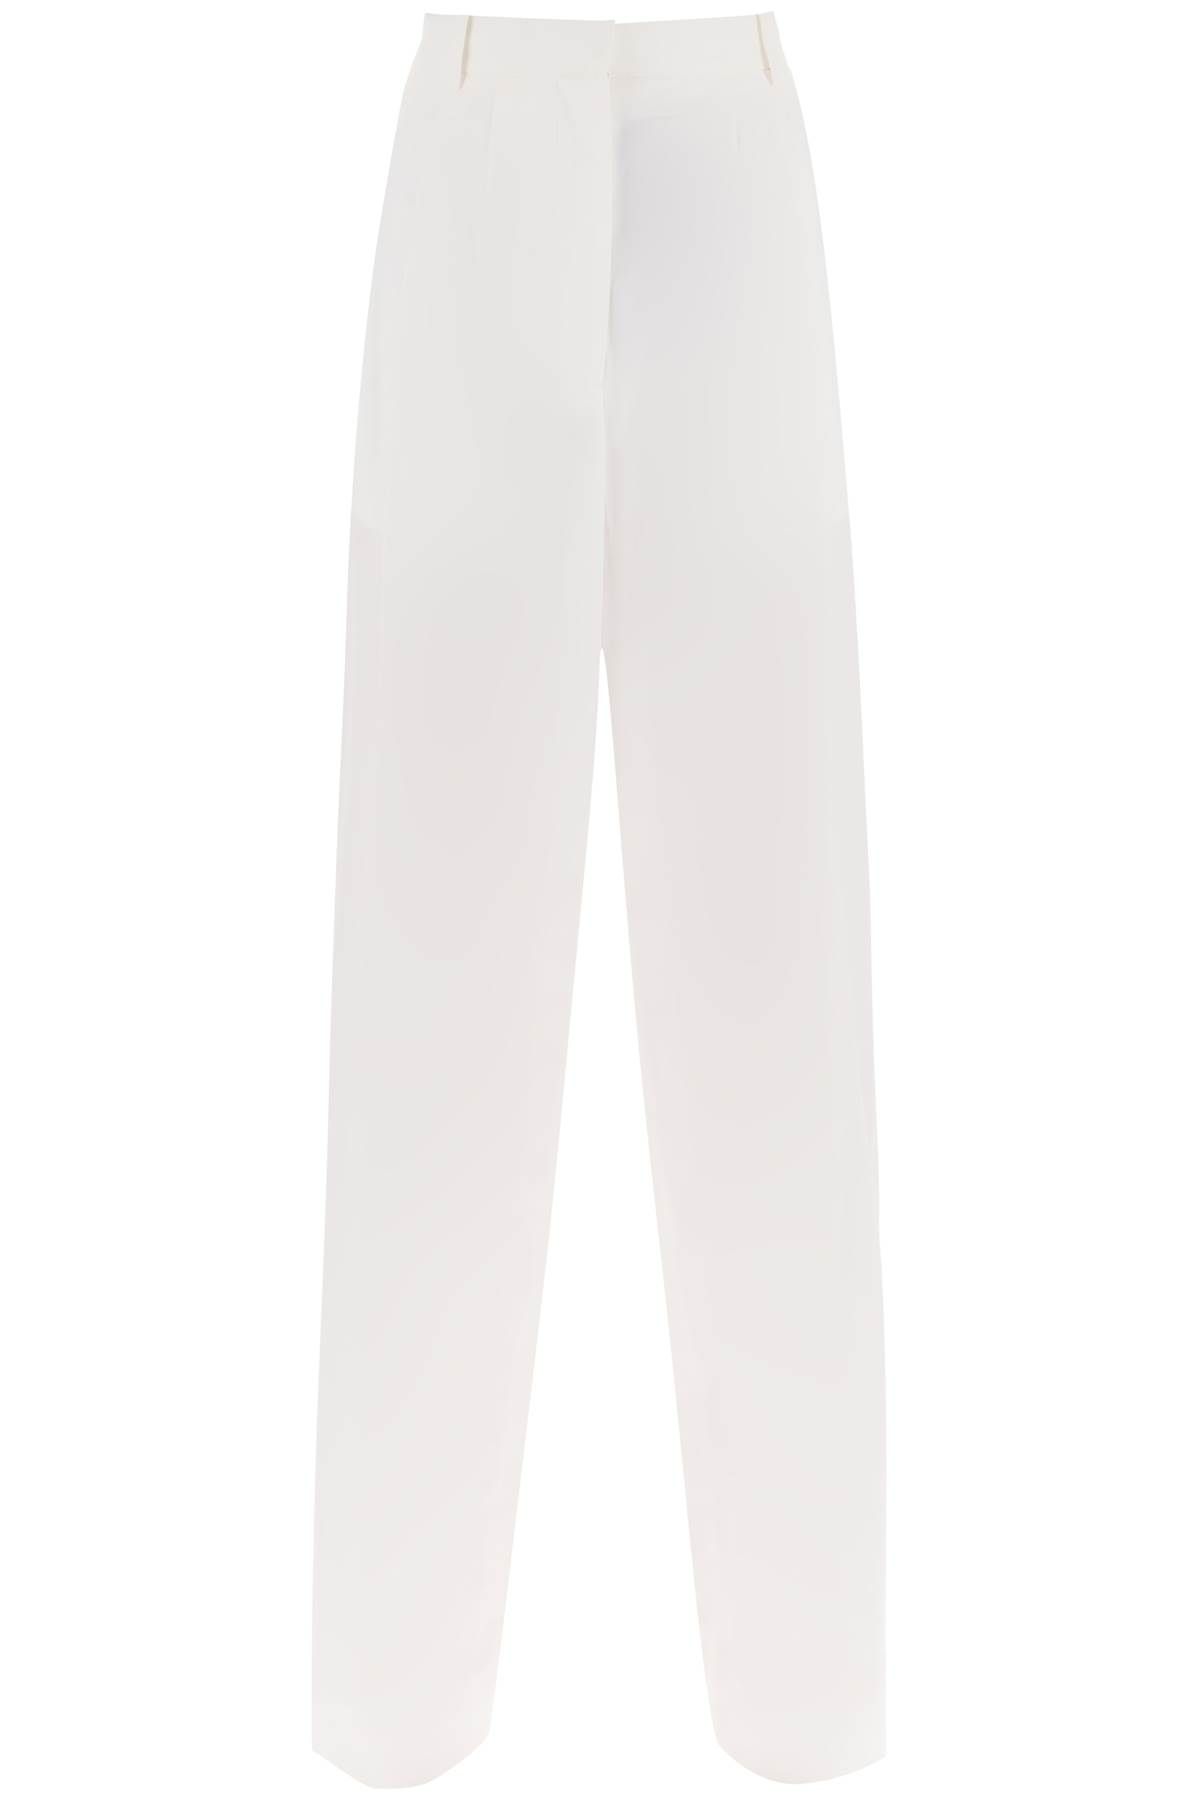 The Row 'bufus' Trousers In Cotton Poplin In White